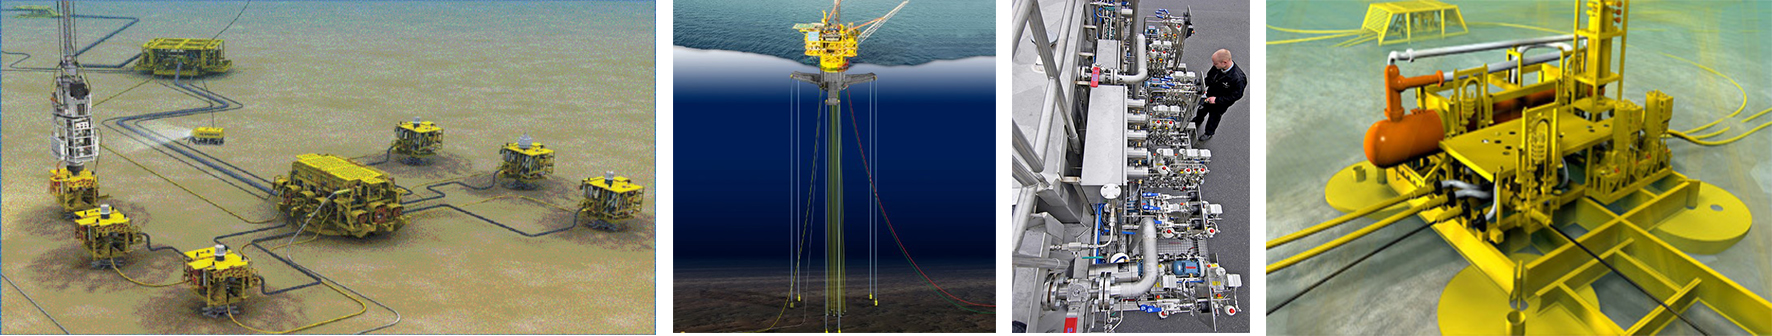 Online subsea isolations images.jpg